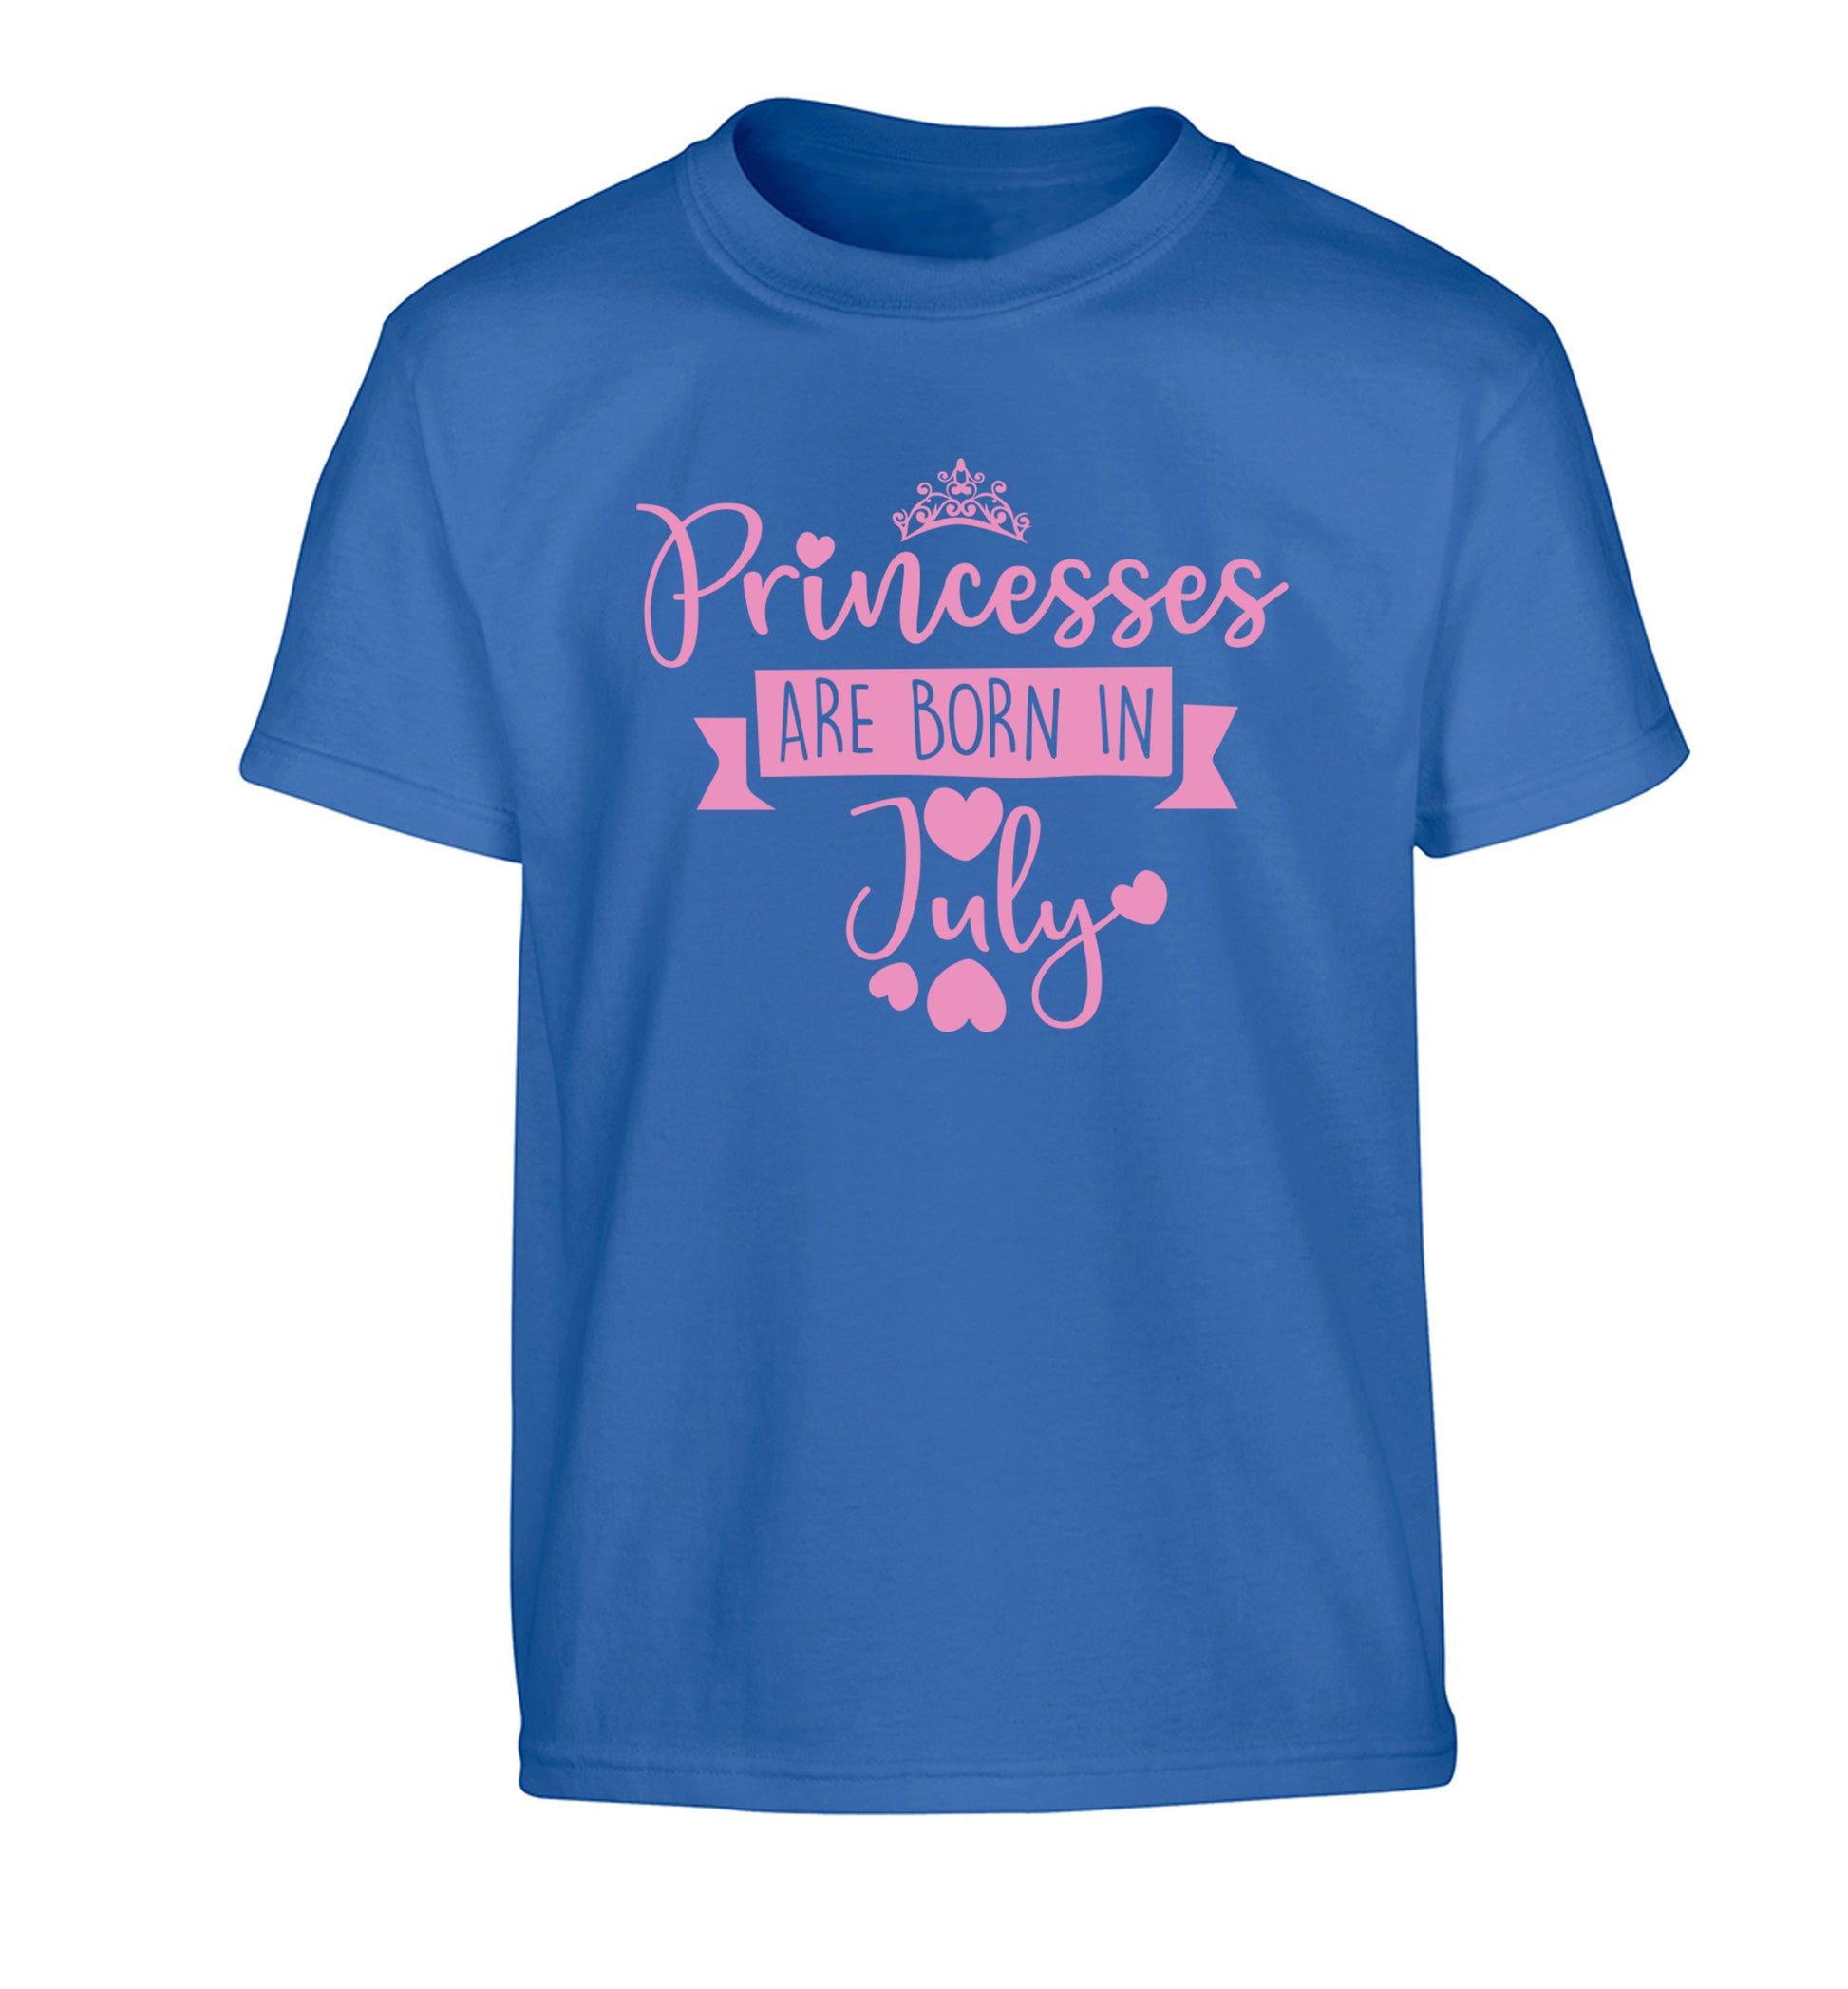 Princesses are born in July Children's blue Tshirt 12-13 Years